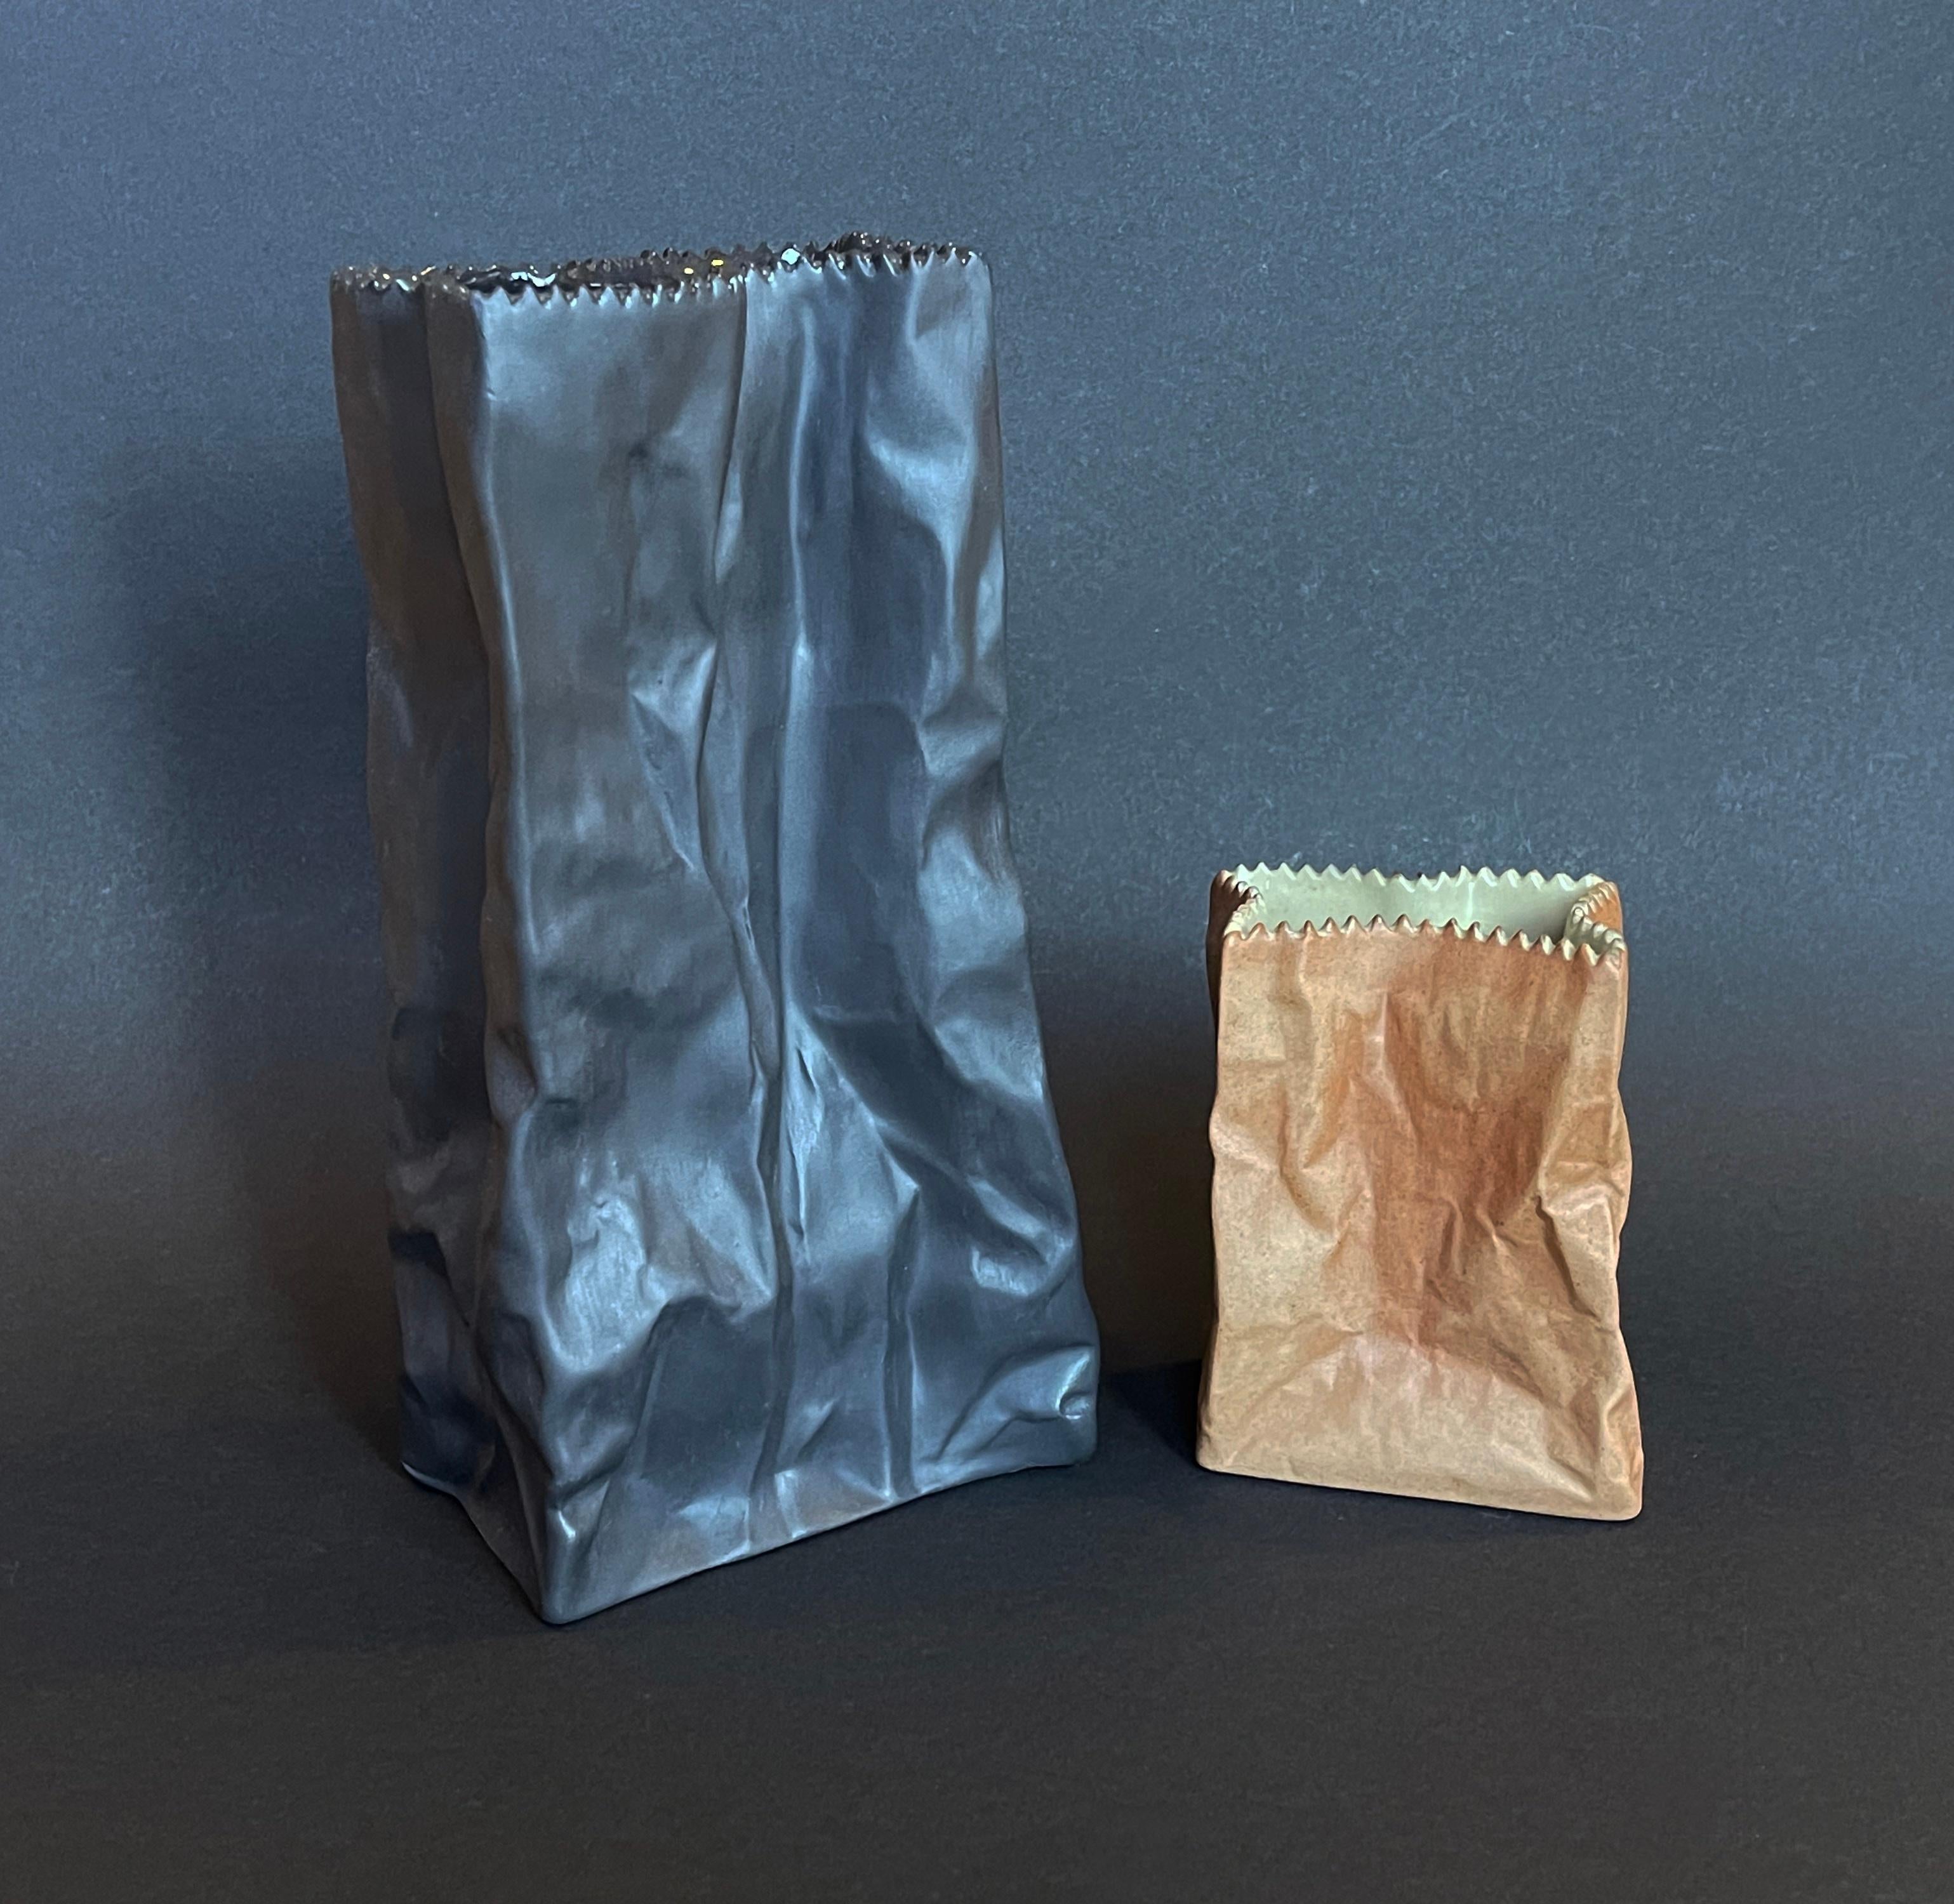 Design vintage classic by Tapio for Rosenthal, Germany.
Set of 2 so called ''Paper Bag'' vases, the brown one, 1977 approx..
It comes with a roughly textured brown paper bag finish and a grey inner.
The black vase is a real rarity indeed in this